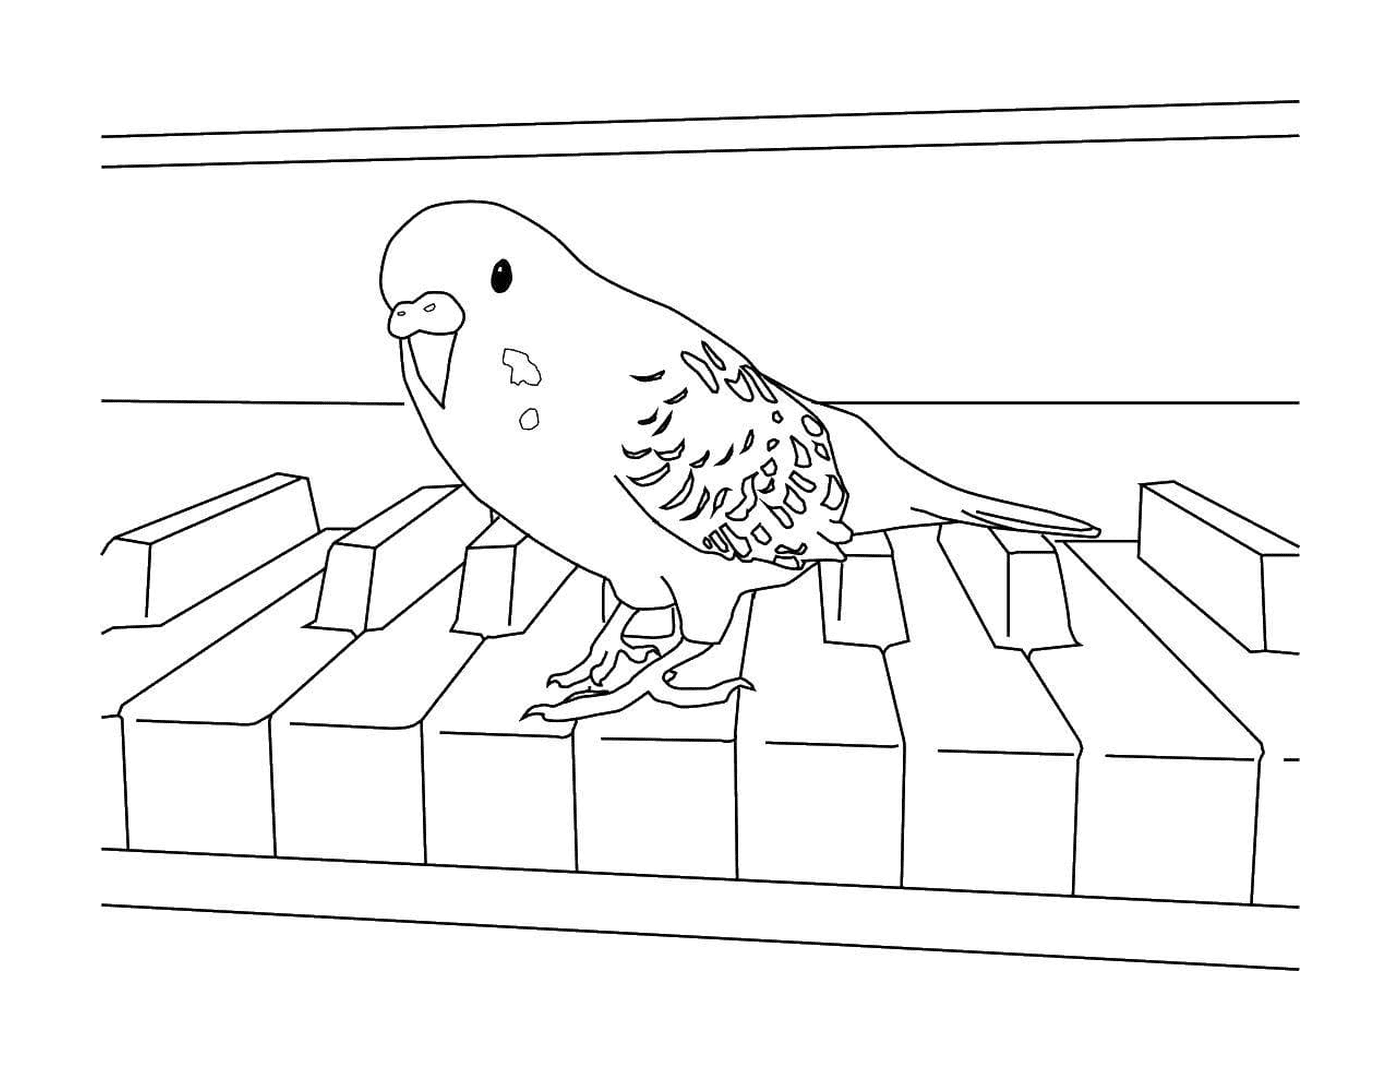  Perrot perched on piano 